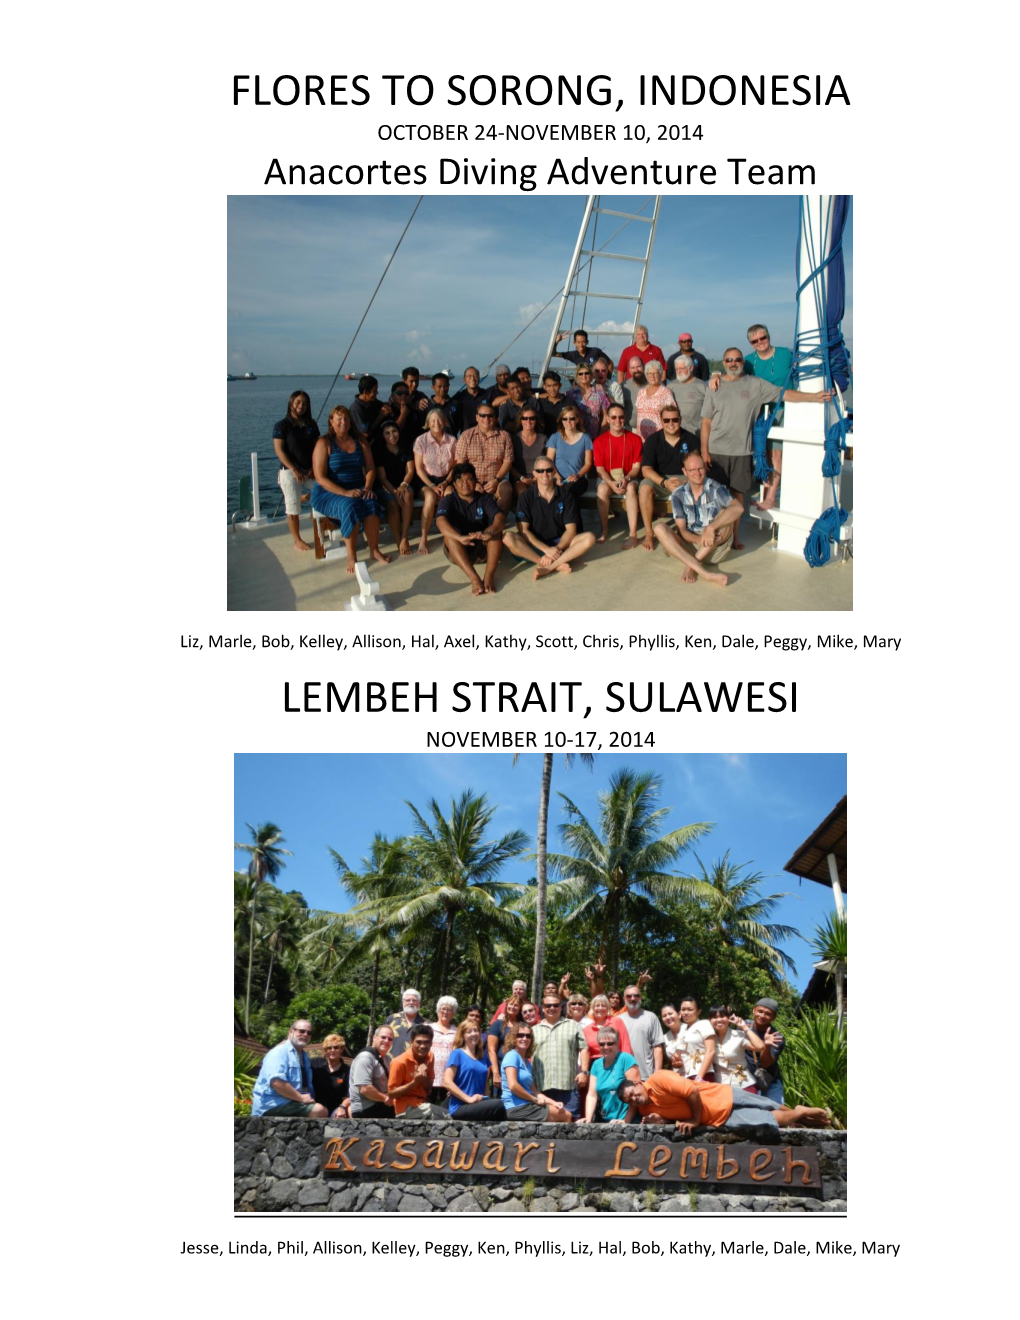 Flores to Raja Ampat and Lembeh Sulawesi 2014